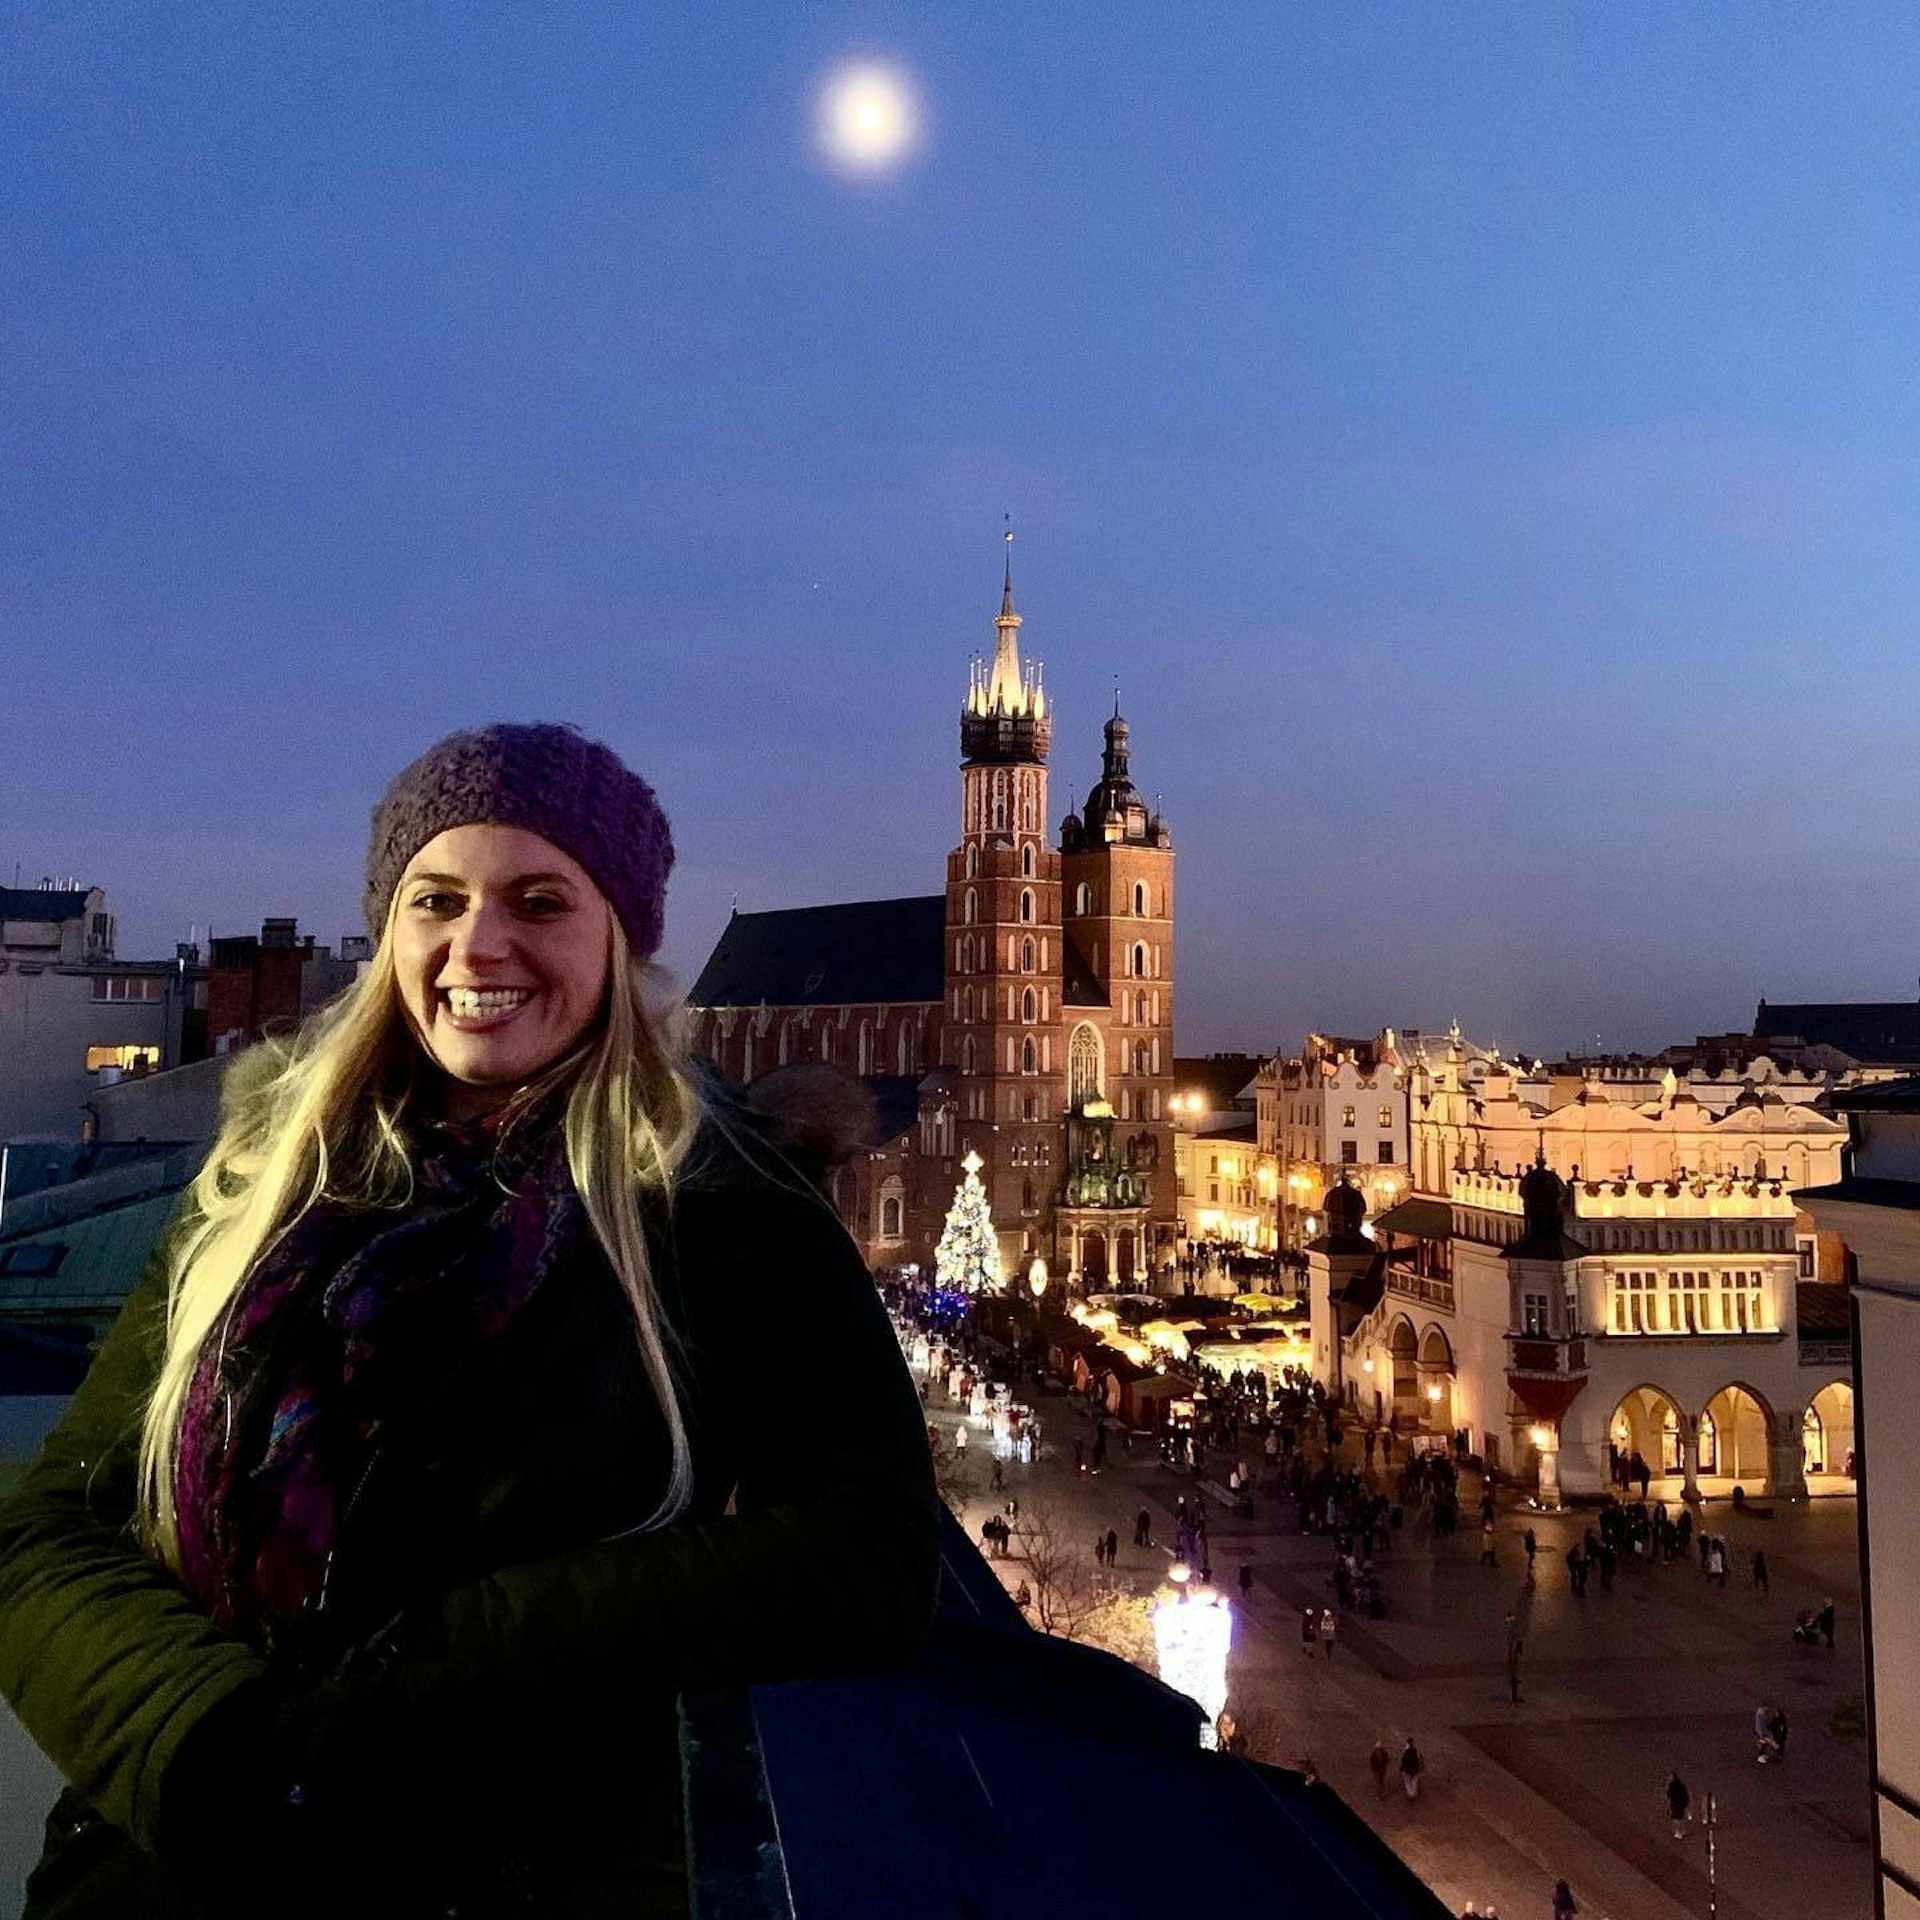 The author smiles in front of an illumianted Wawel Cathedral at night